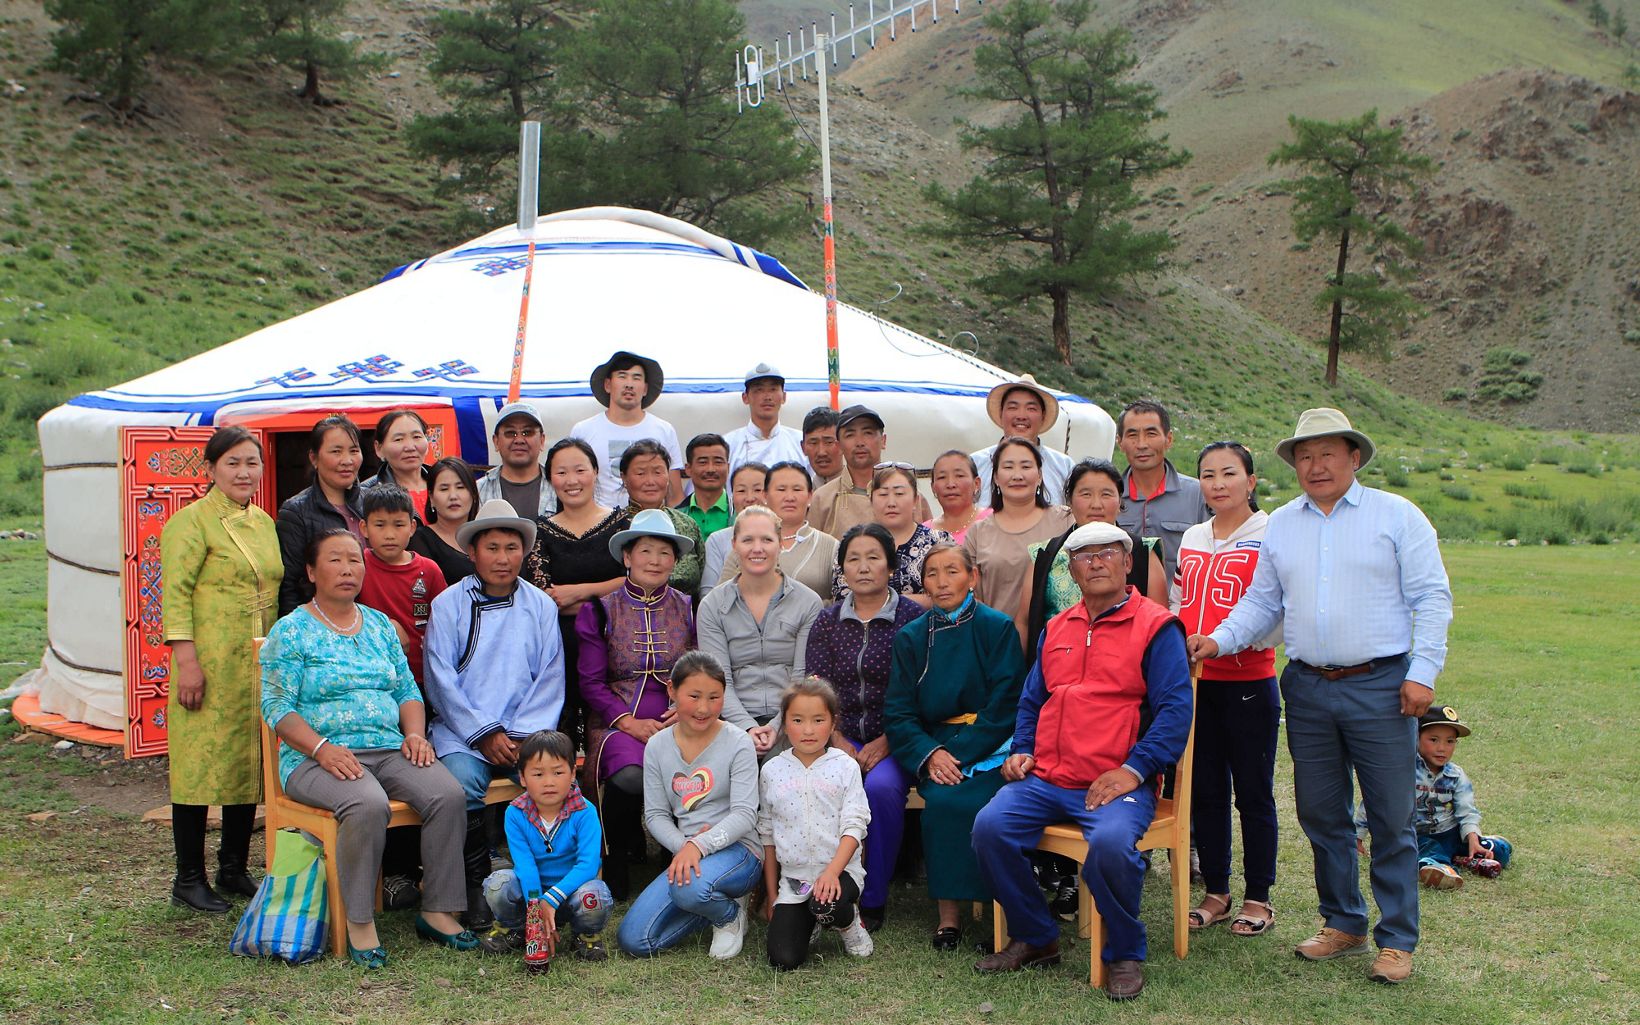 The local community poses in front a Mongolia ger tent at their eco-camp.